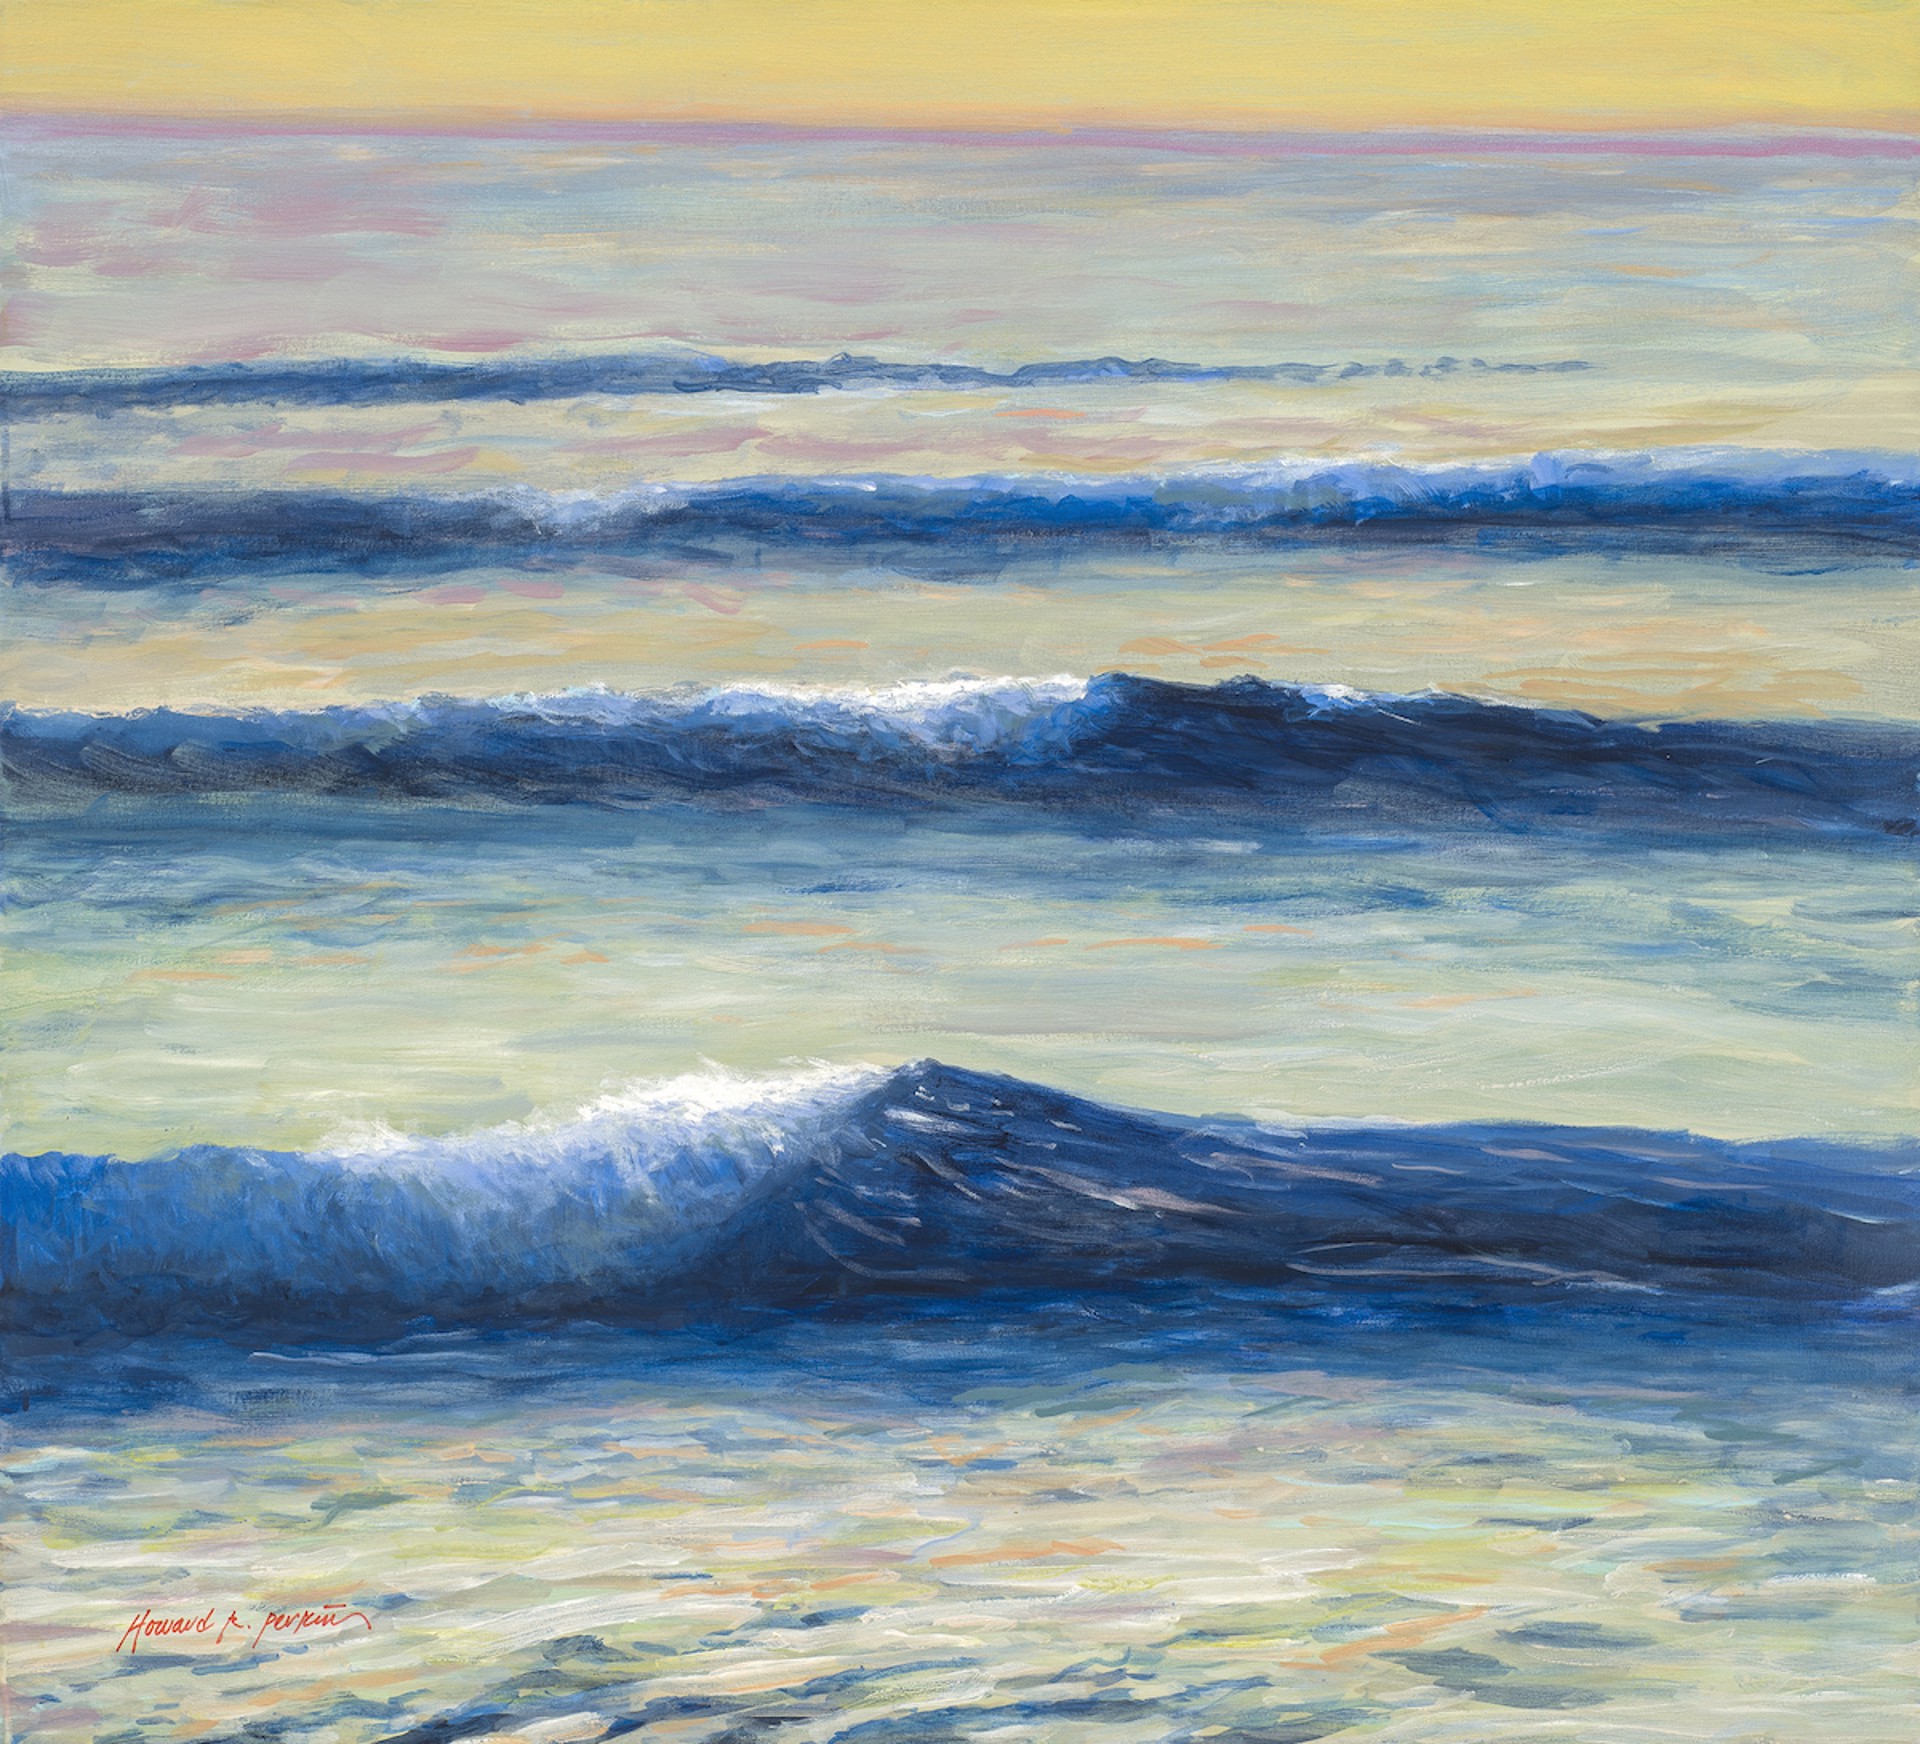 Sunset With Shoreline Breakers by Howard R. Perkins